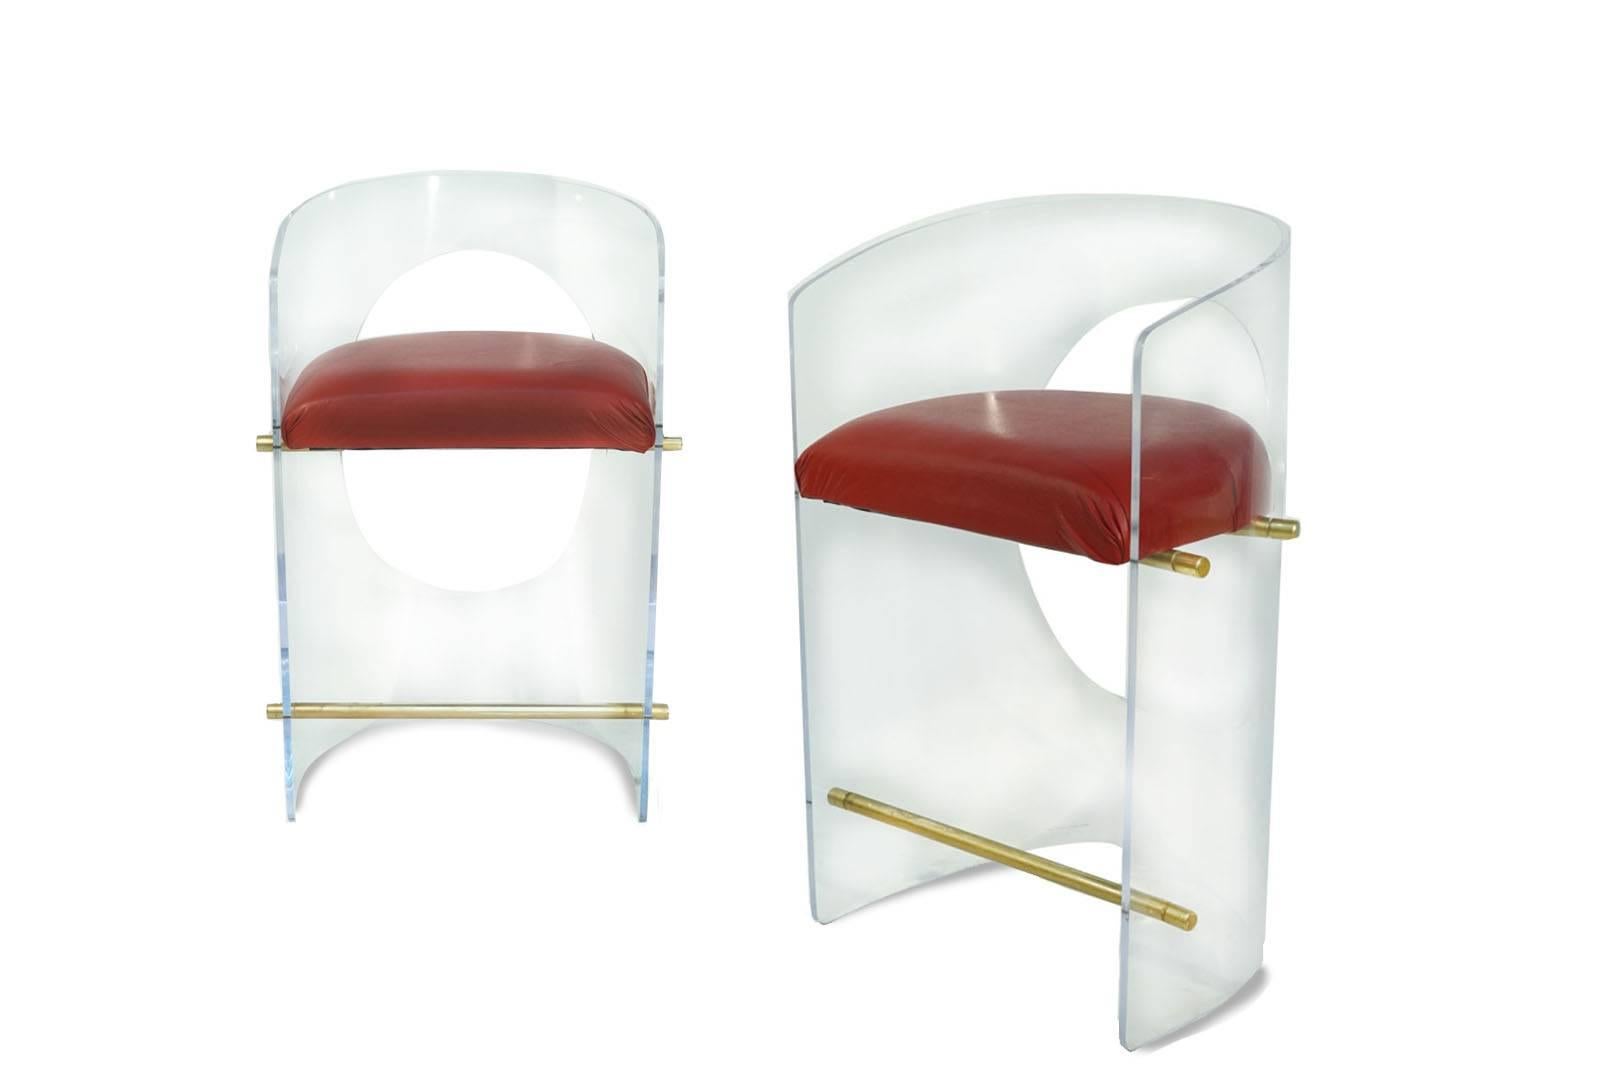 Absolutely gorgeous thick Lucite bar stools with brass detail, custom-made by Loft Thirteen. 

Made to order.
Custom sizes and colored Lucite available.